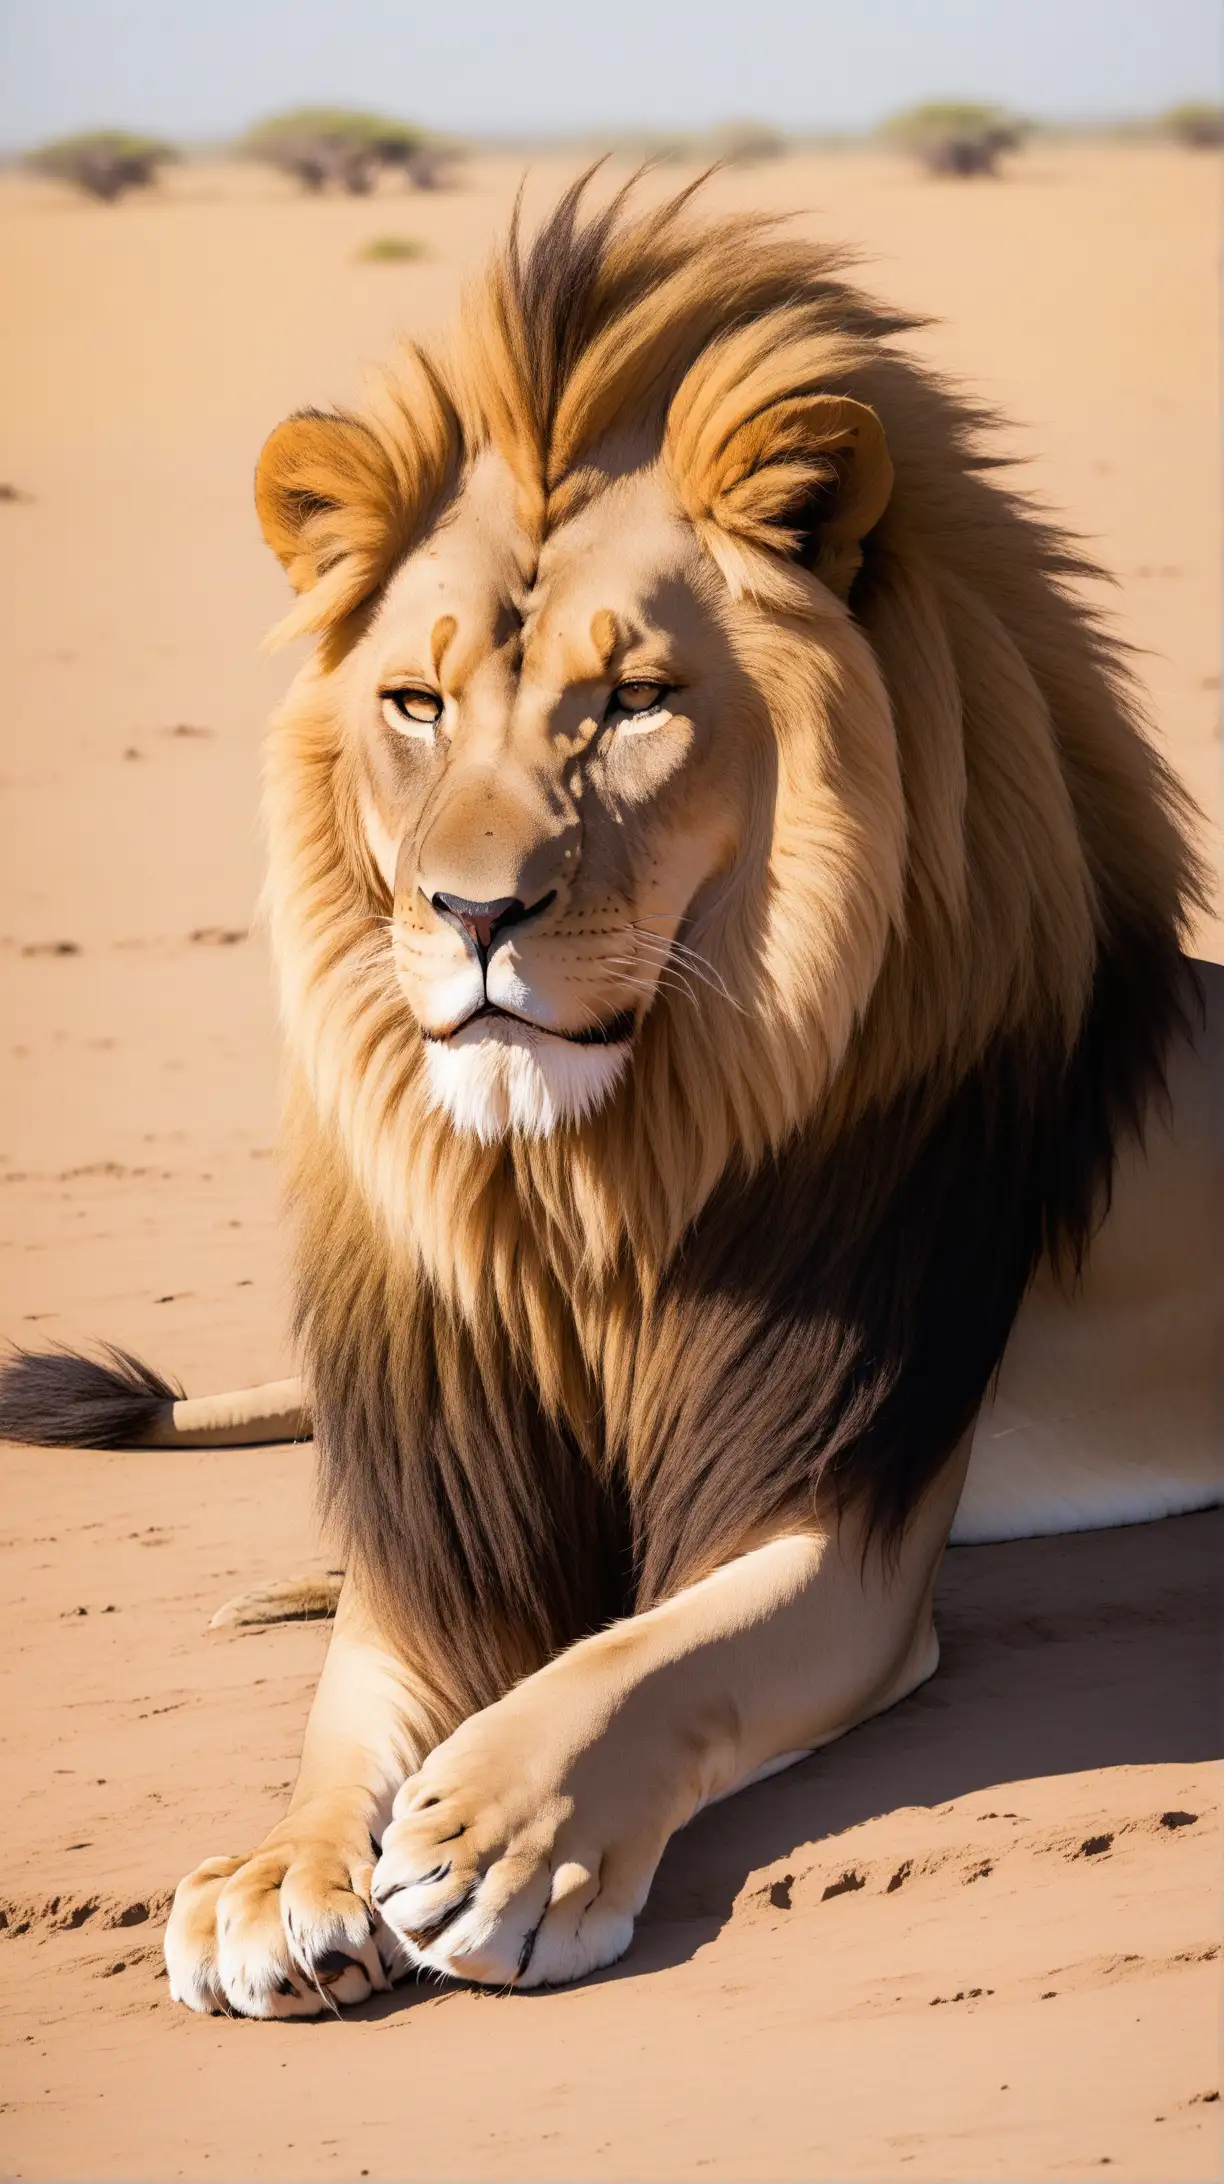 Majestic Male Lion Showing Signs of Fatigue